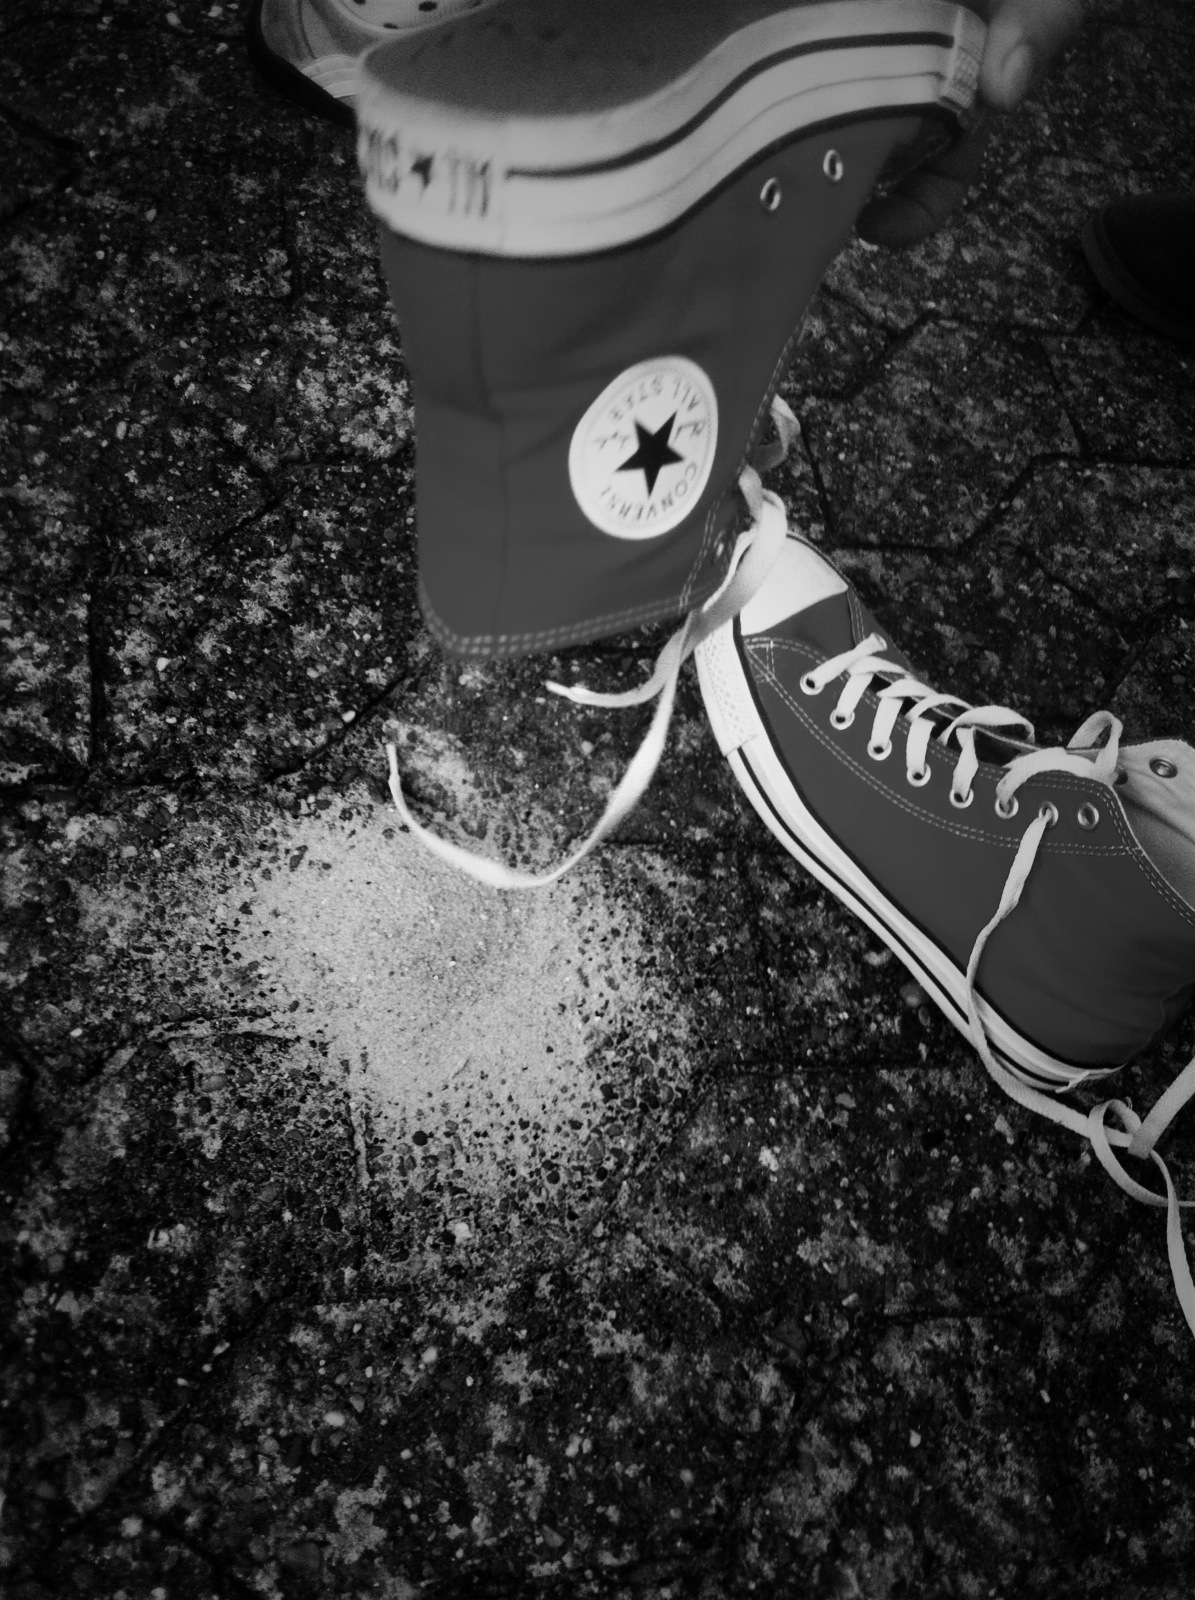 black and white pograph of the shoe of someone's converse shoes